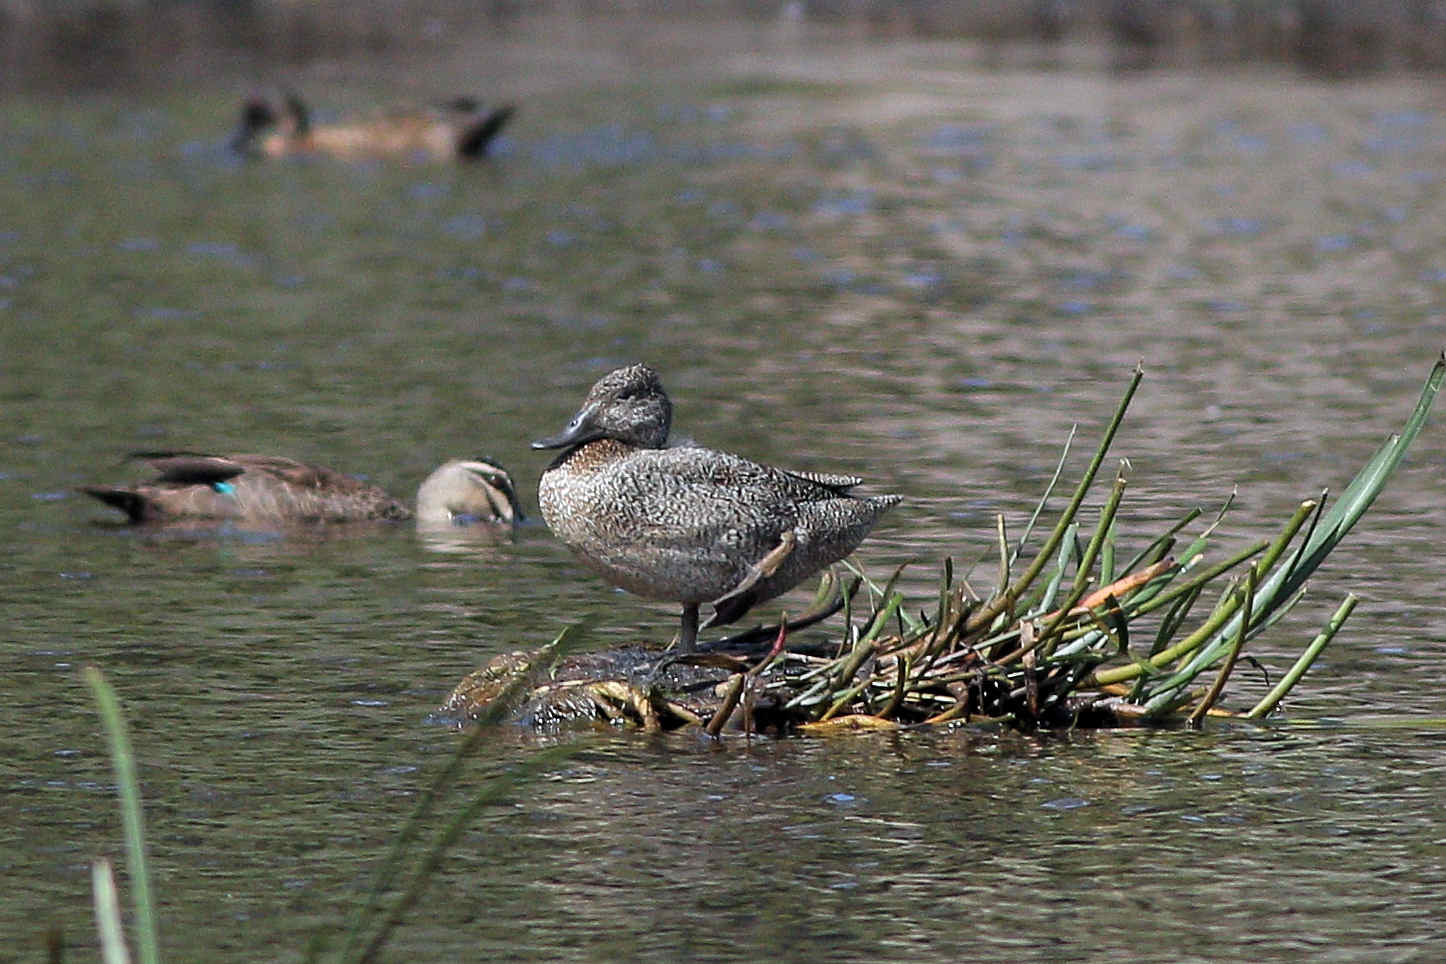 Image courtesy of Max Sutcliffe Freckled Duck sighting near Wallagoot lake